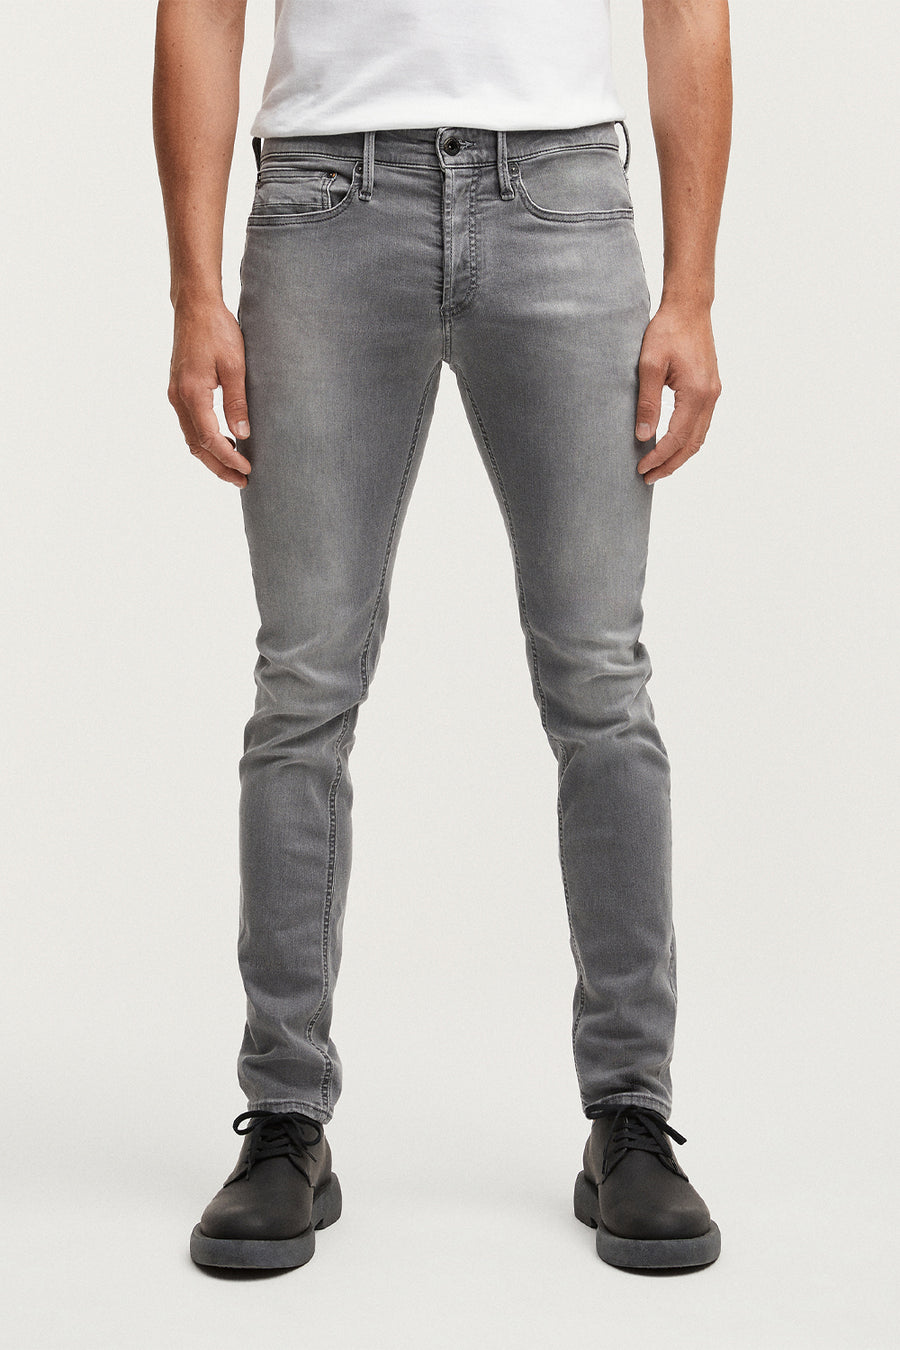 Buy the Denham Bolt Subtle Fade Denim Jean in Grey at Intro. Spend £50 for free UK delivery. Official stockists. We ship worldwide.